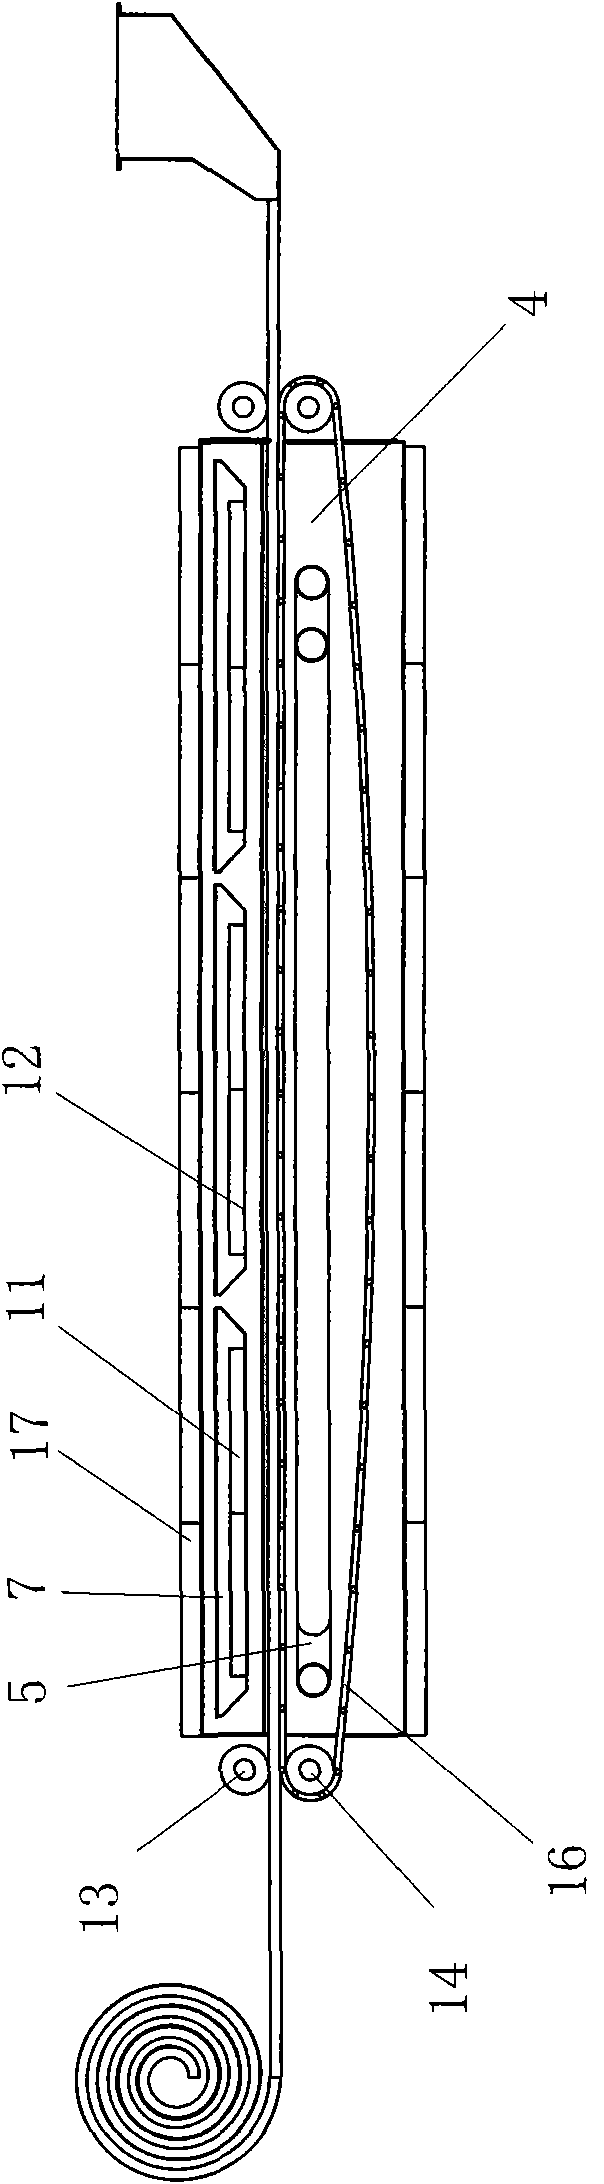 Thermal forming device for producing non-woven cotton